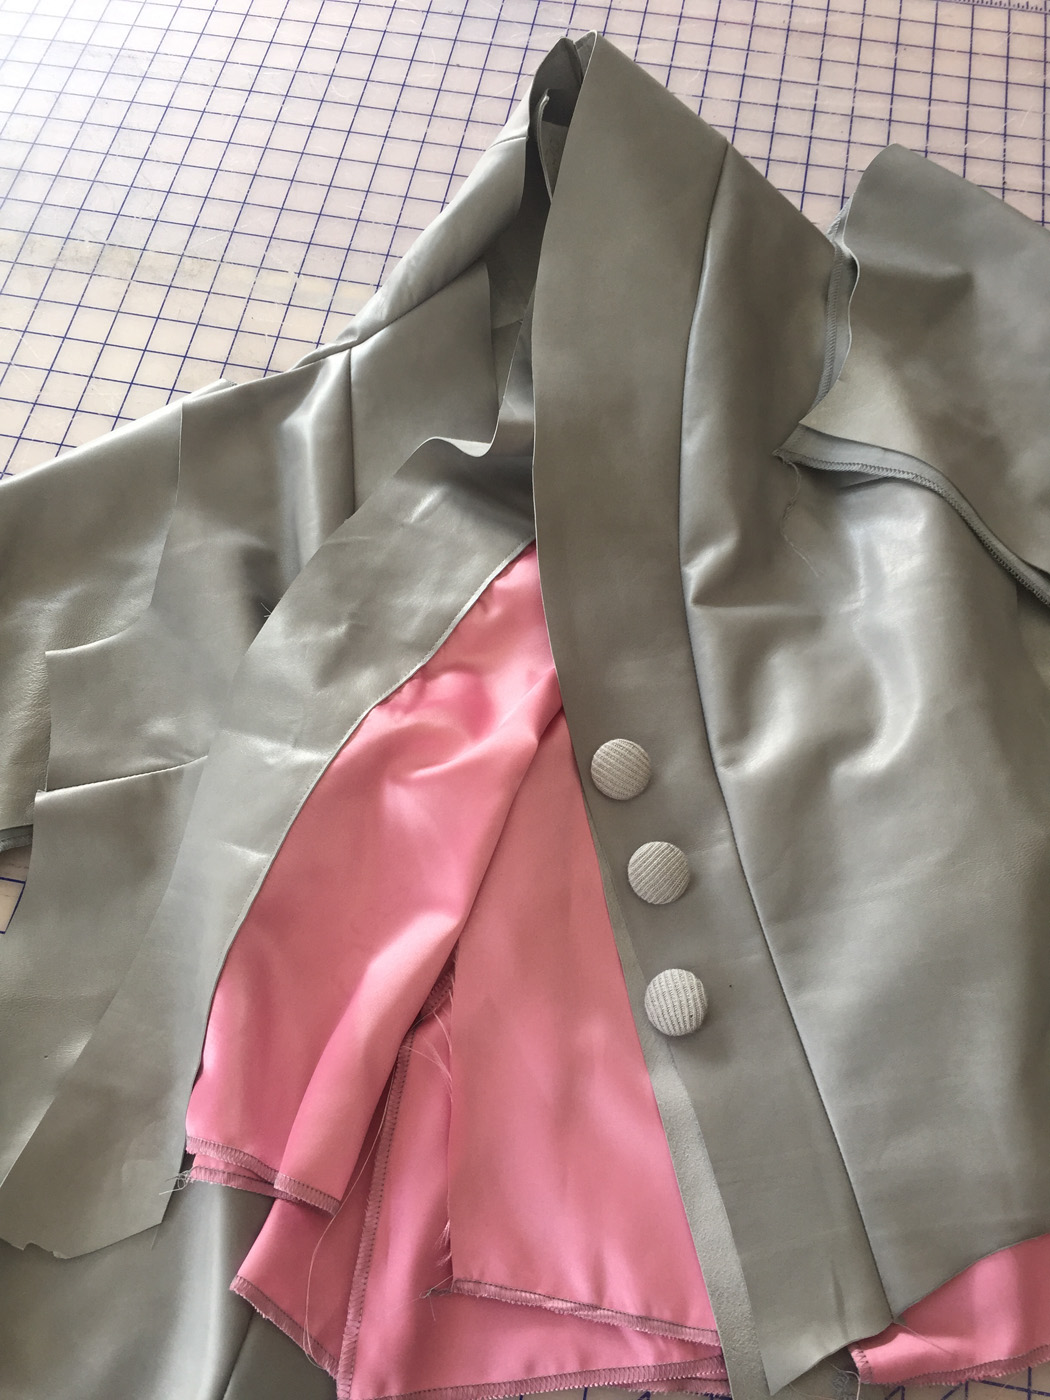 A work in progress: Stina Sayre's jacket, inspired by a jacket (and its buttons) at the Martha's Vineyard Museum. –Courtesy Stina Sayre/The MV Museum